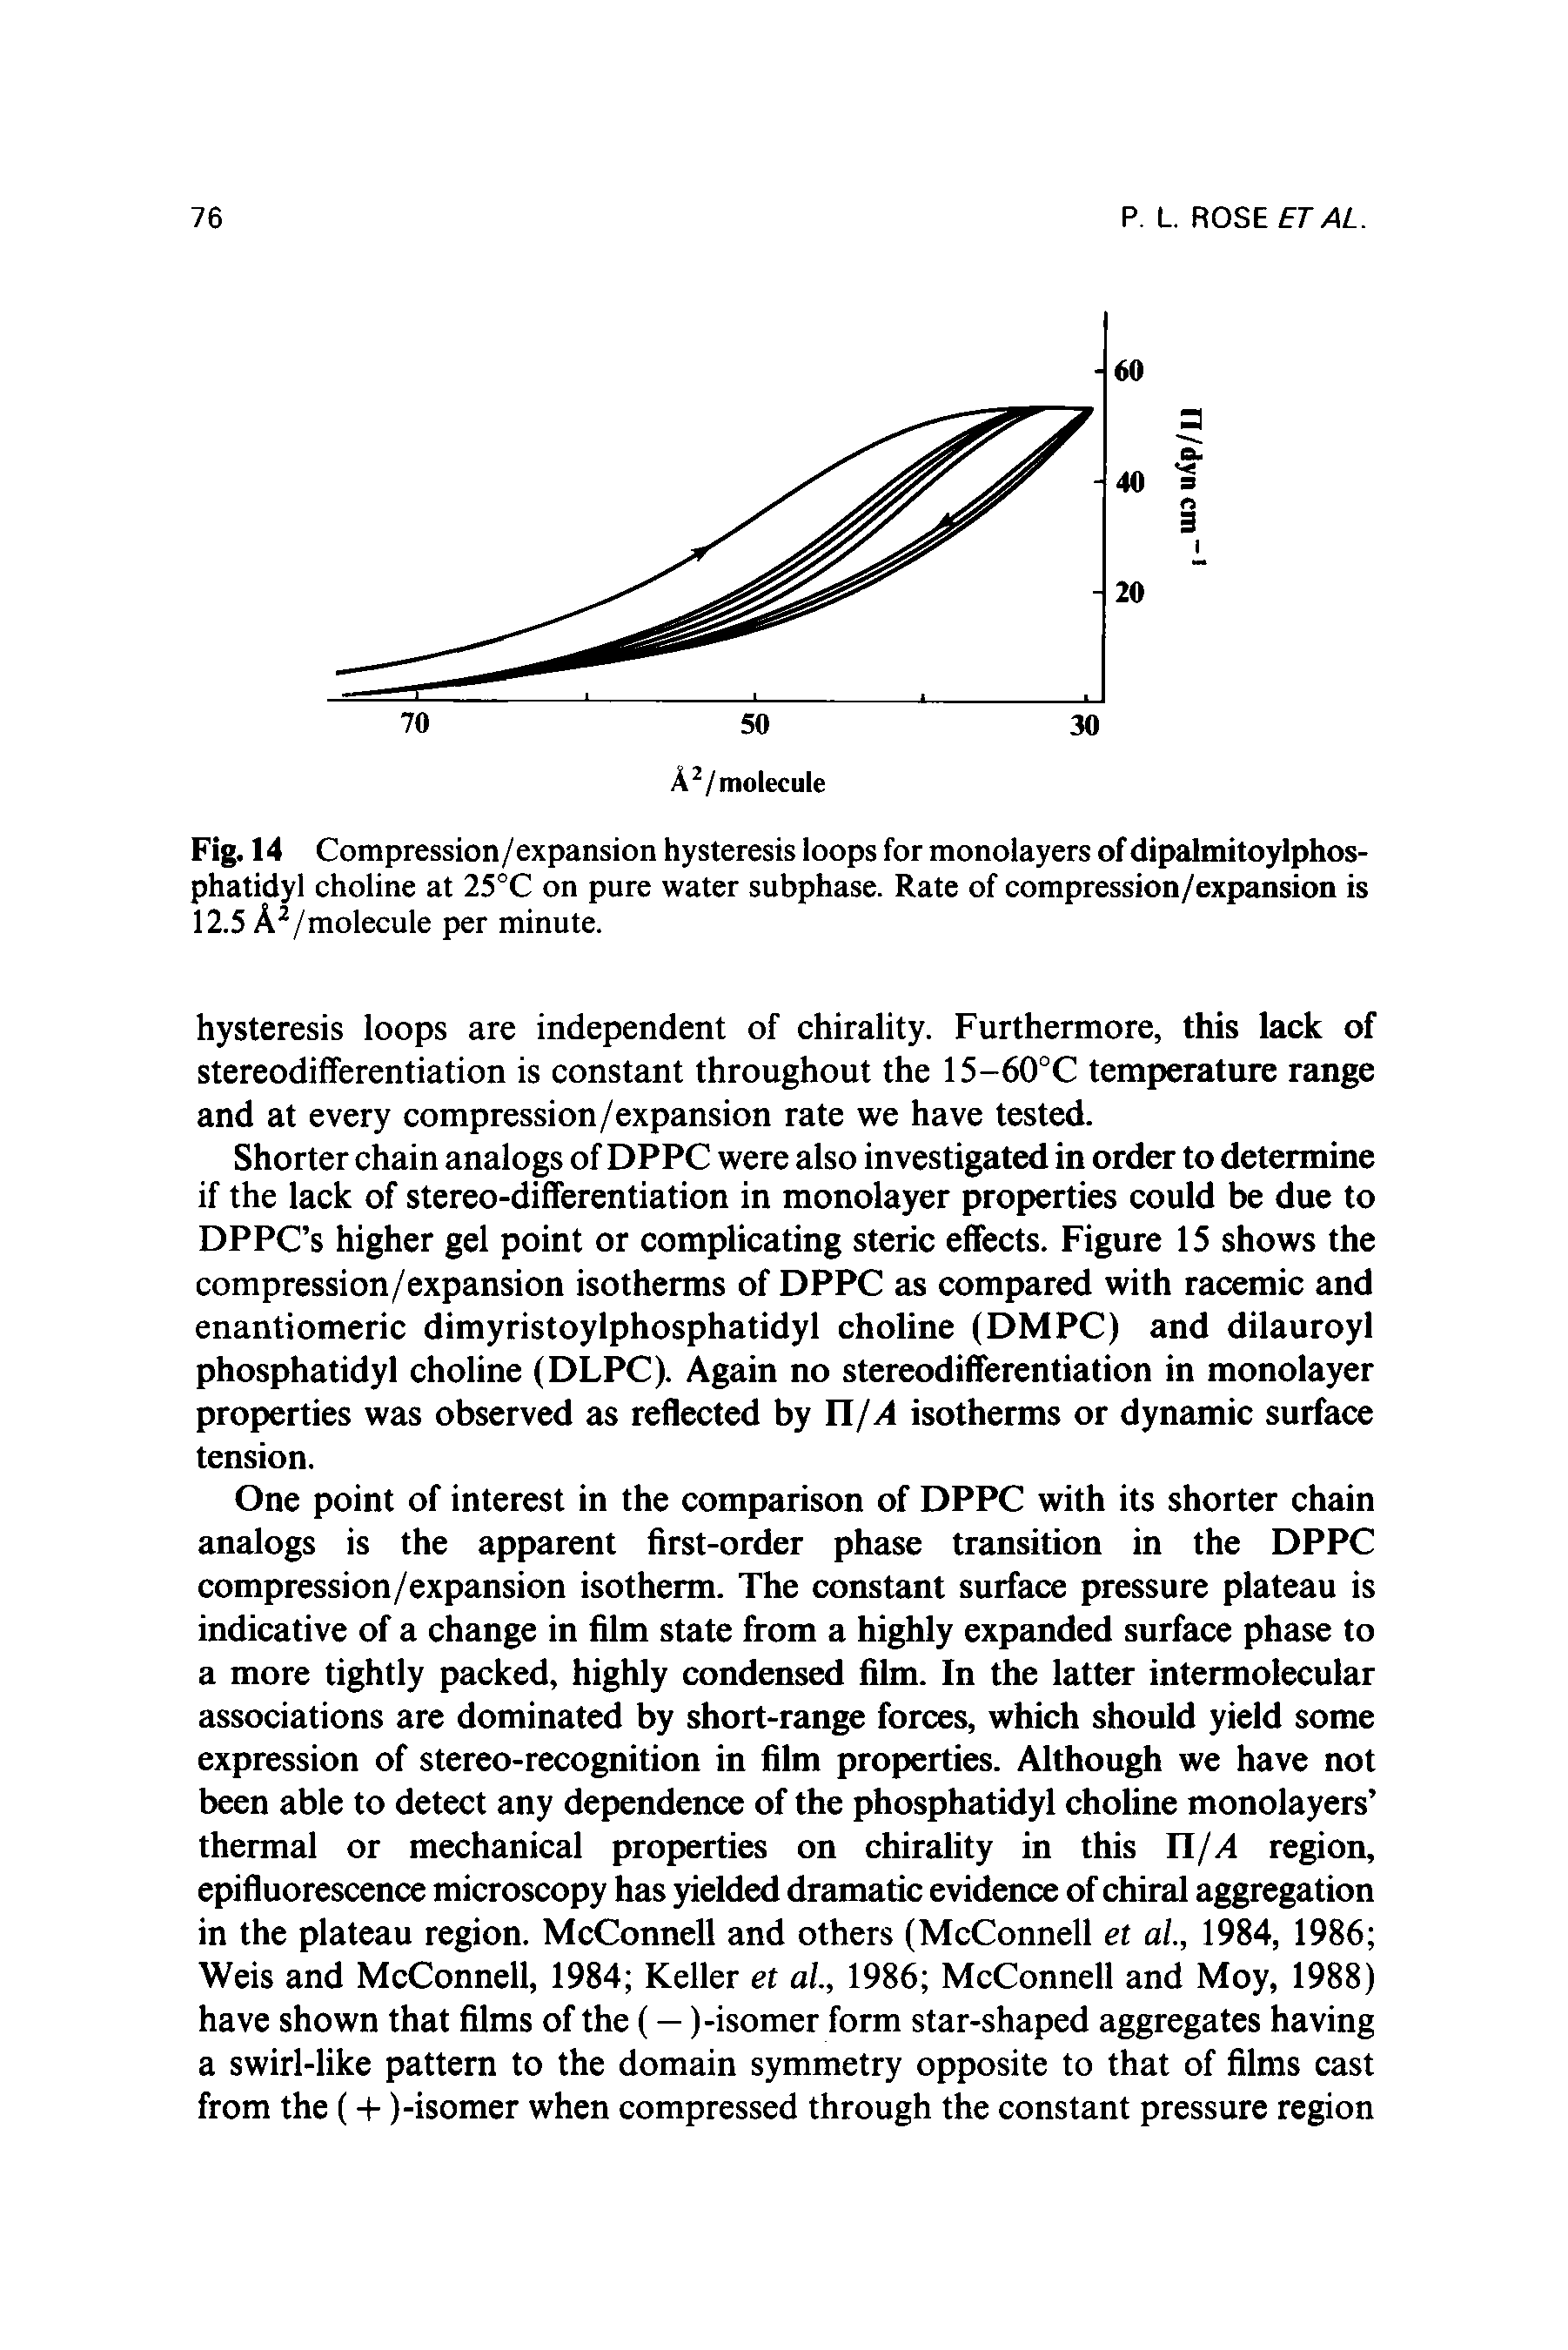 Fig. 14 Compression/expansion hysteresis loops for monolayers of dipalmitoylphos-phatidyl choline at 25°C on pure water subphase. Rate of compression/expansion is 12.5 A2/molecule per minute.